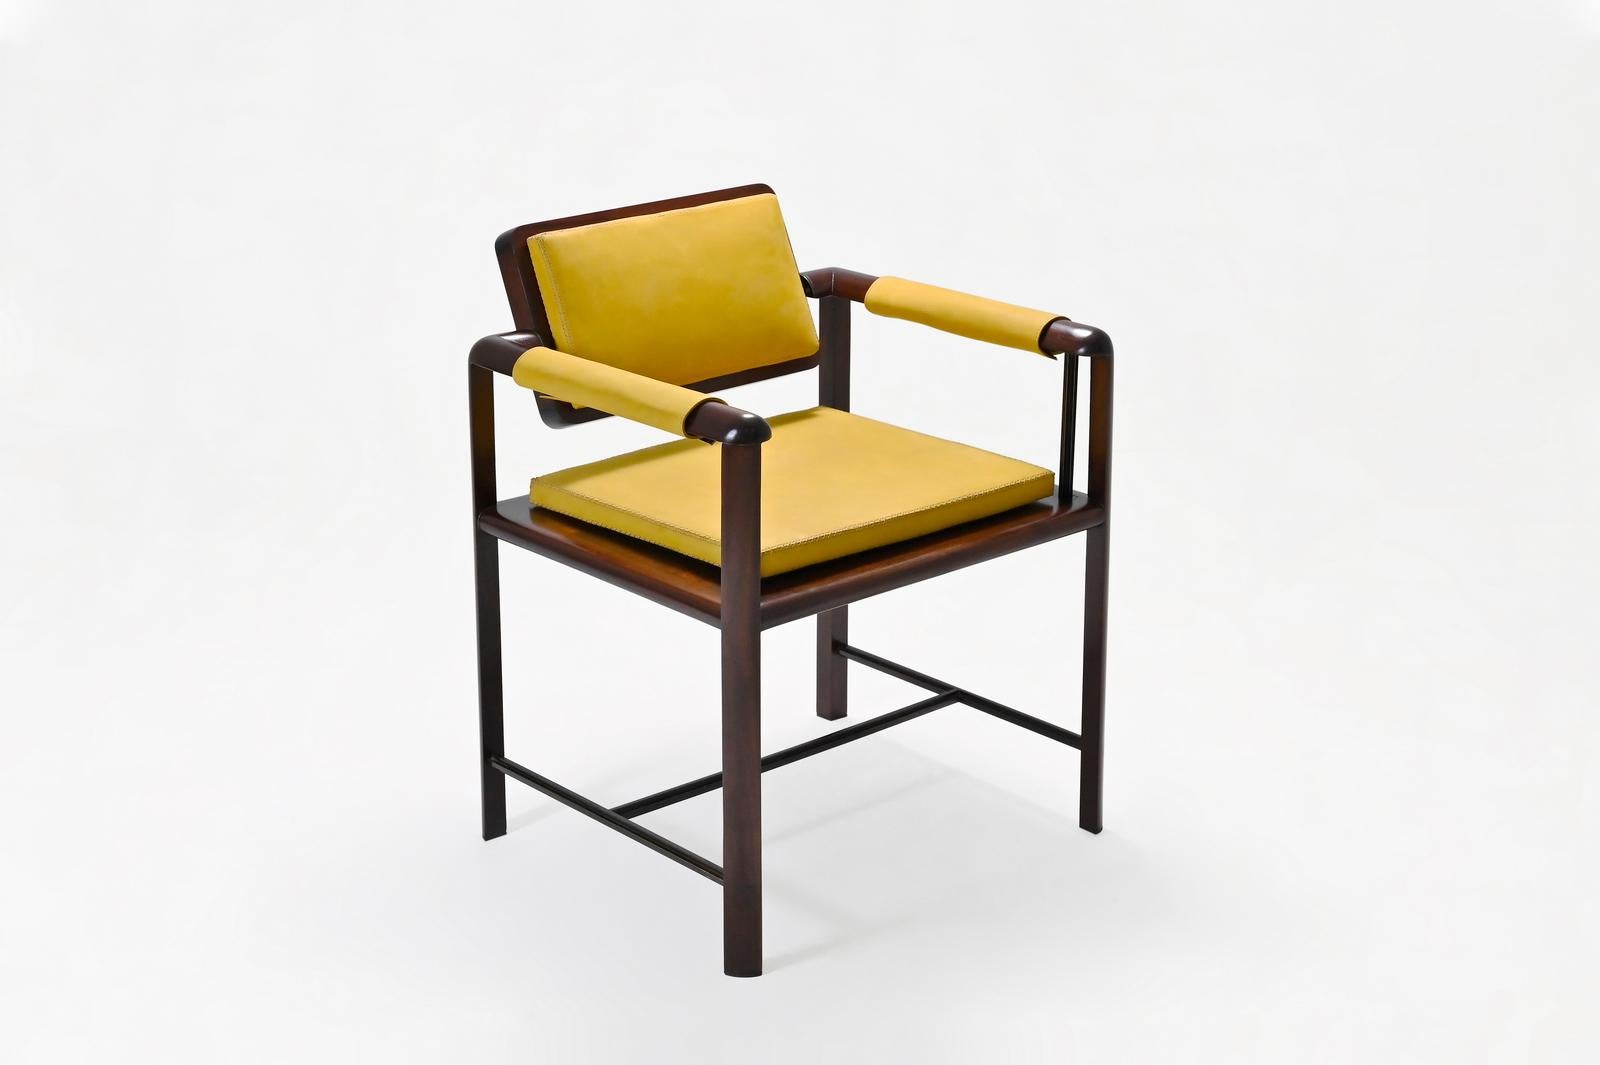 Mid-Century Modern Bespoke Chair Reclaimed Hardwood Handstitched Leather Seating, P. Tendercool For Sale